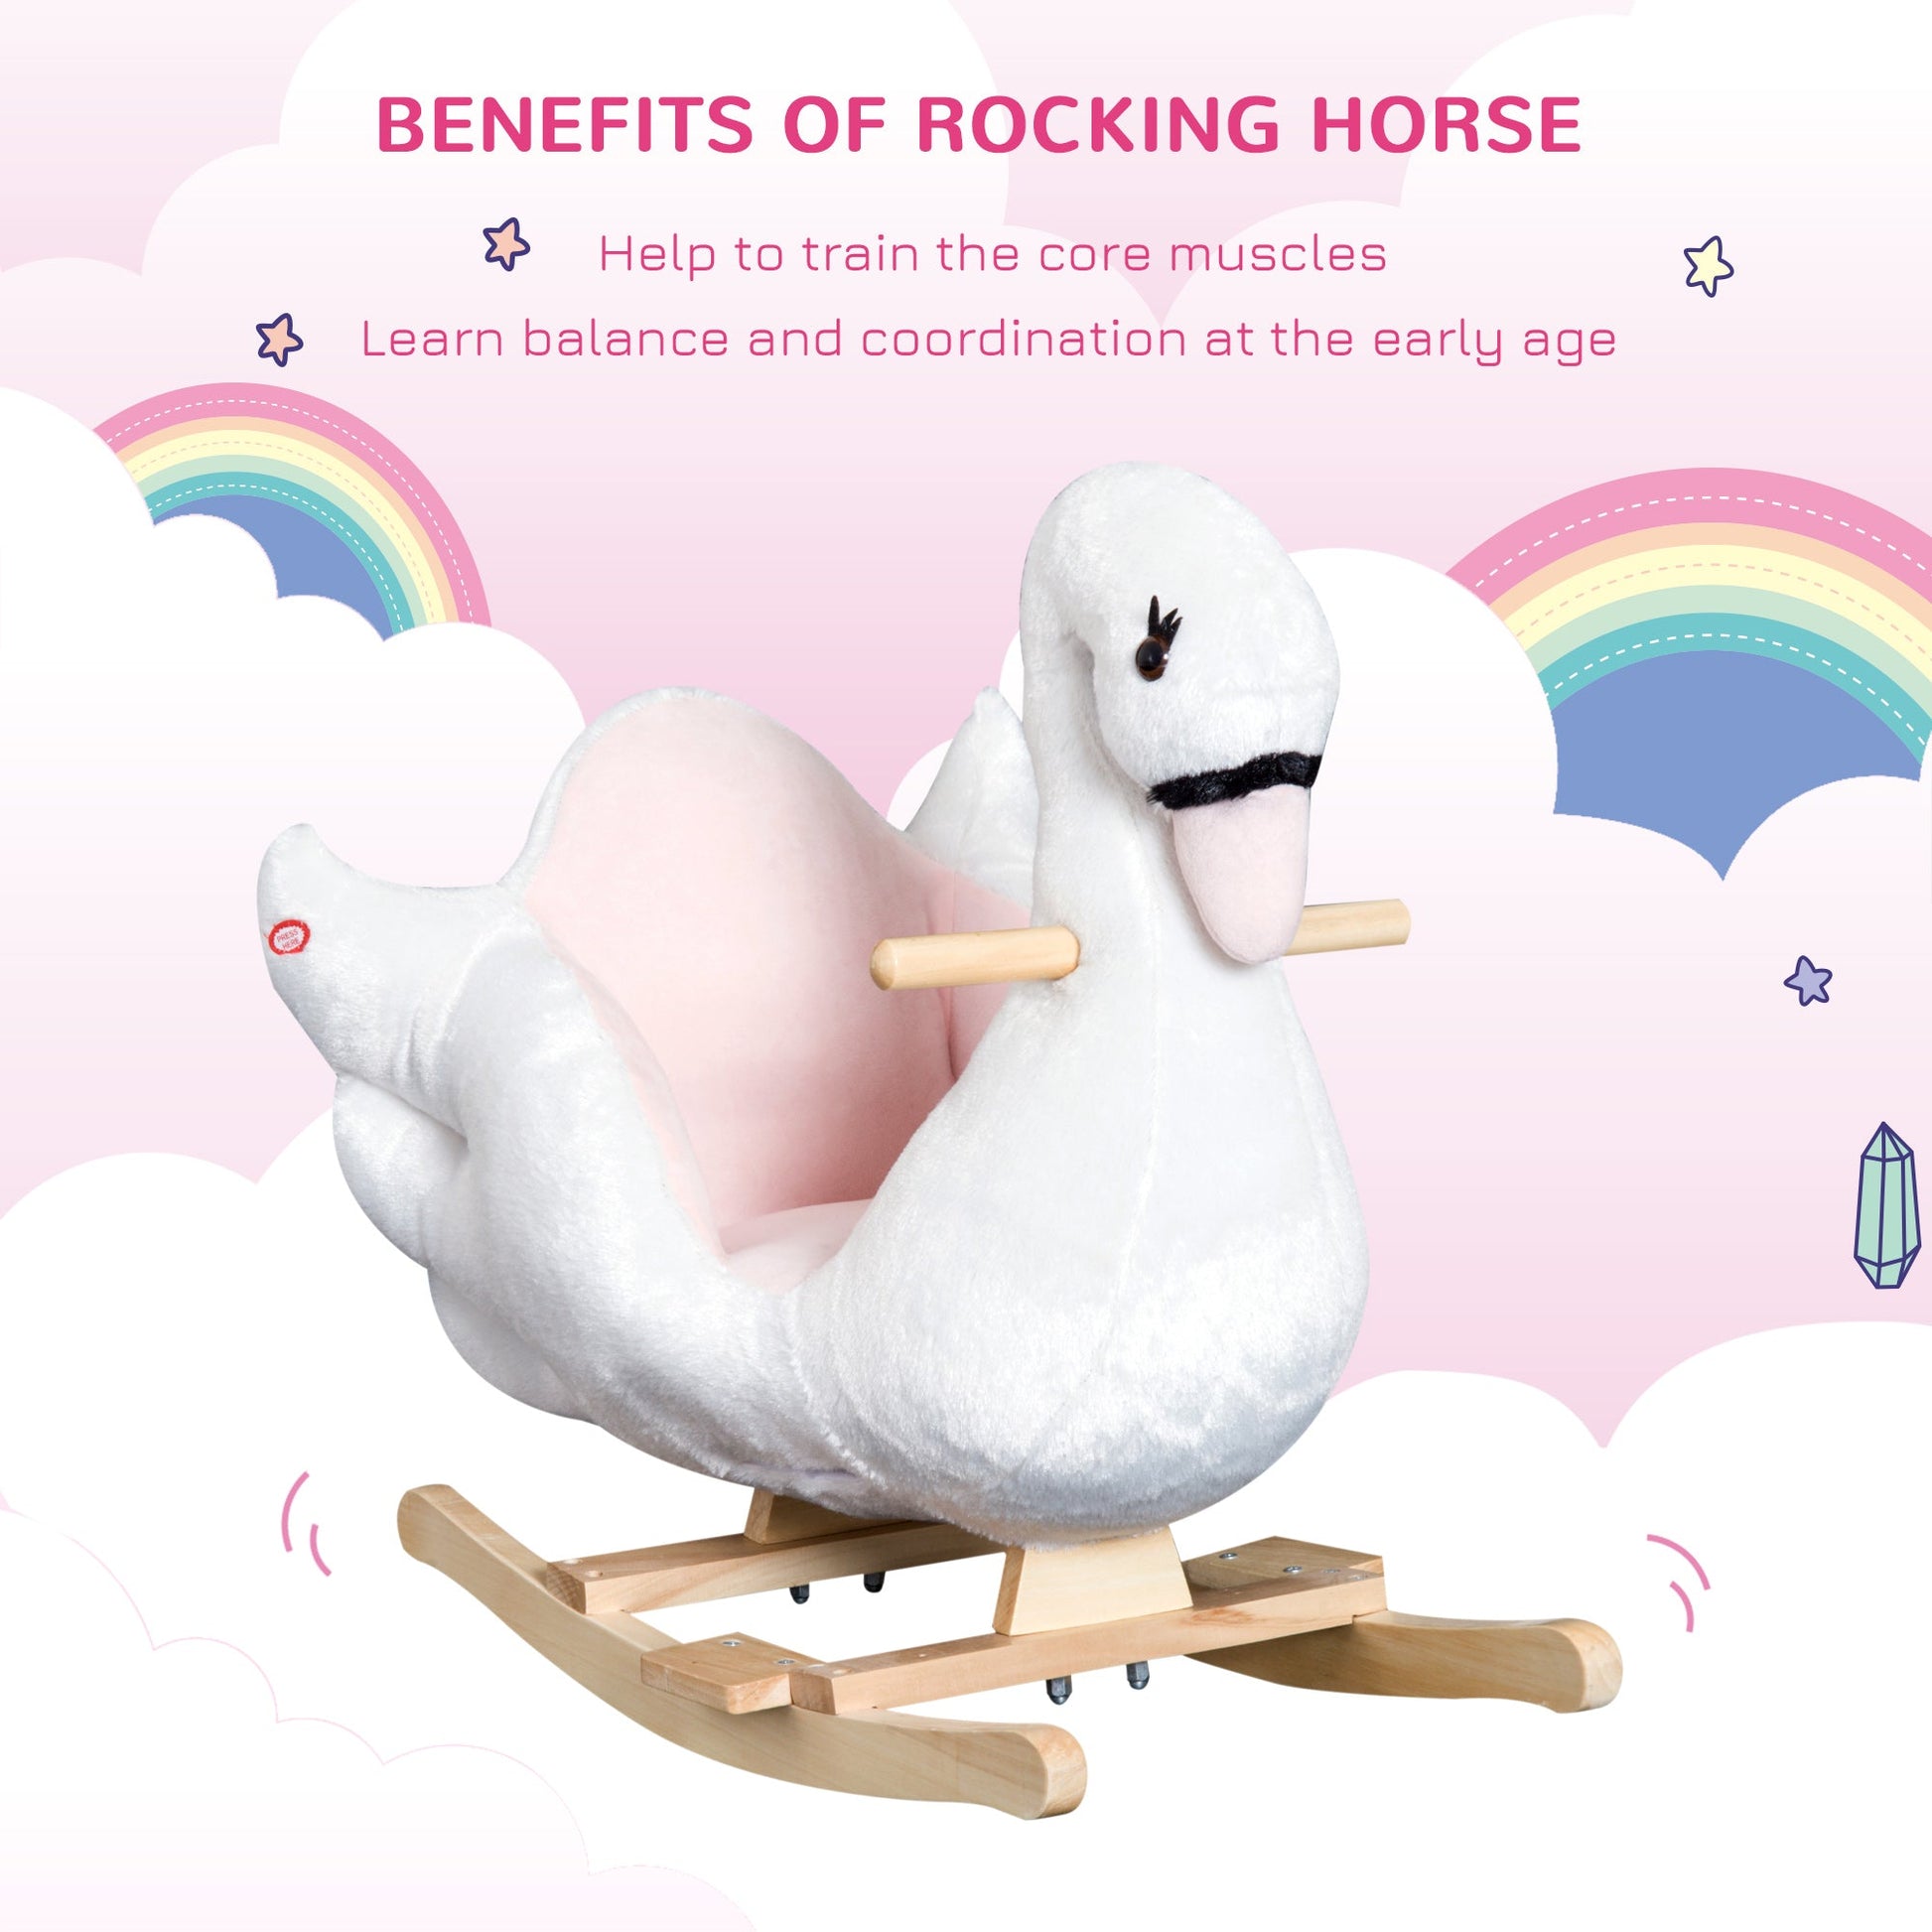 Soft Warm Kids Rocking Horse Child Plush Ride On Toy Swan Style Playtime with Lullaby Song White at Gallery Canada